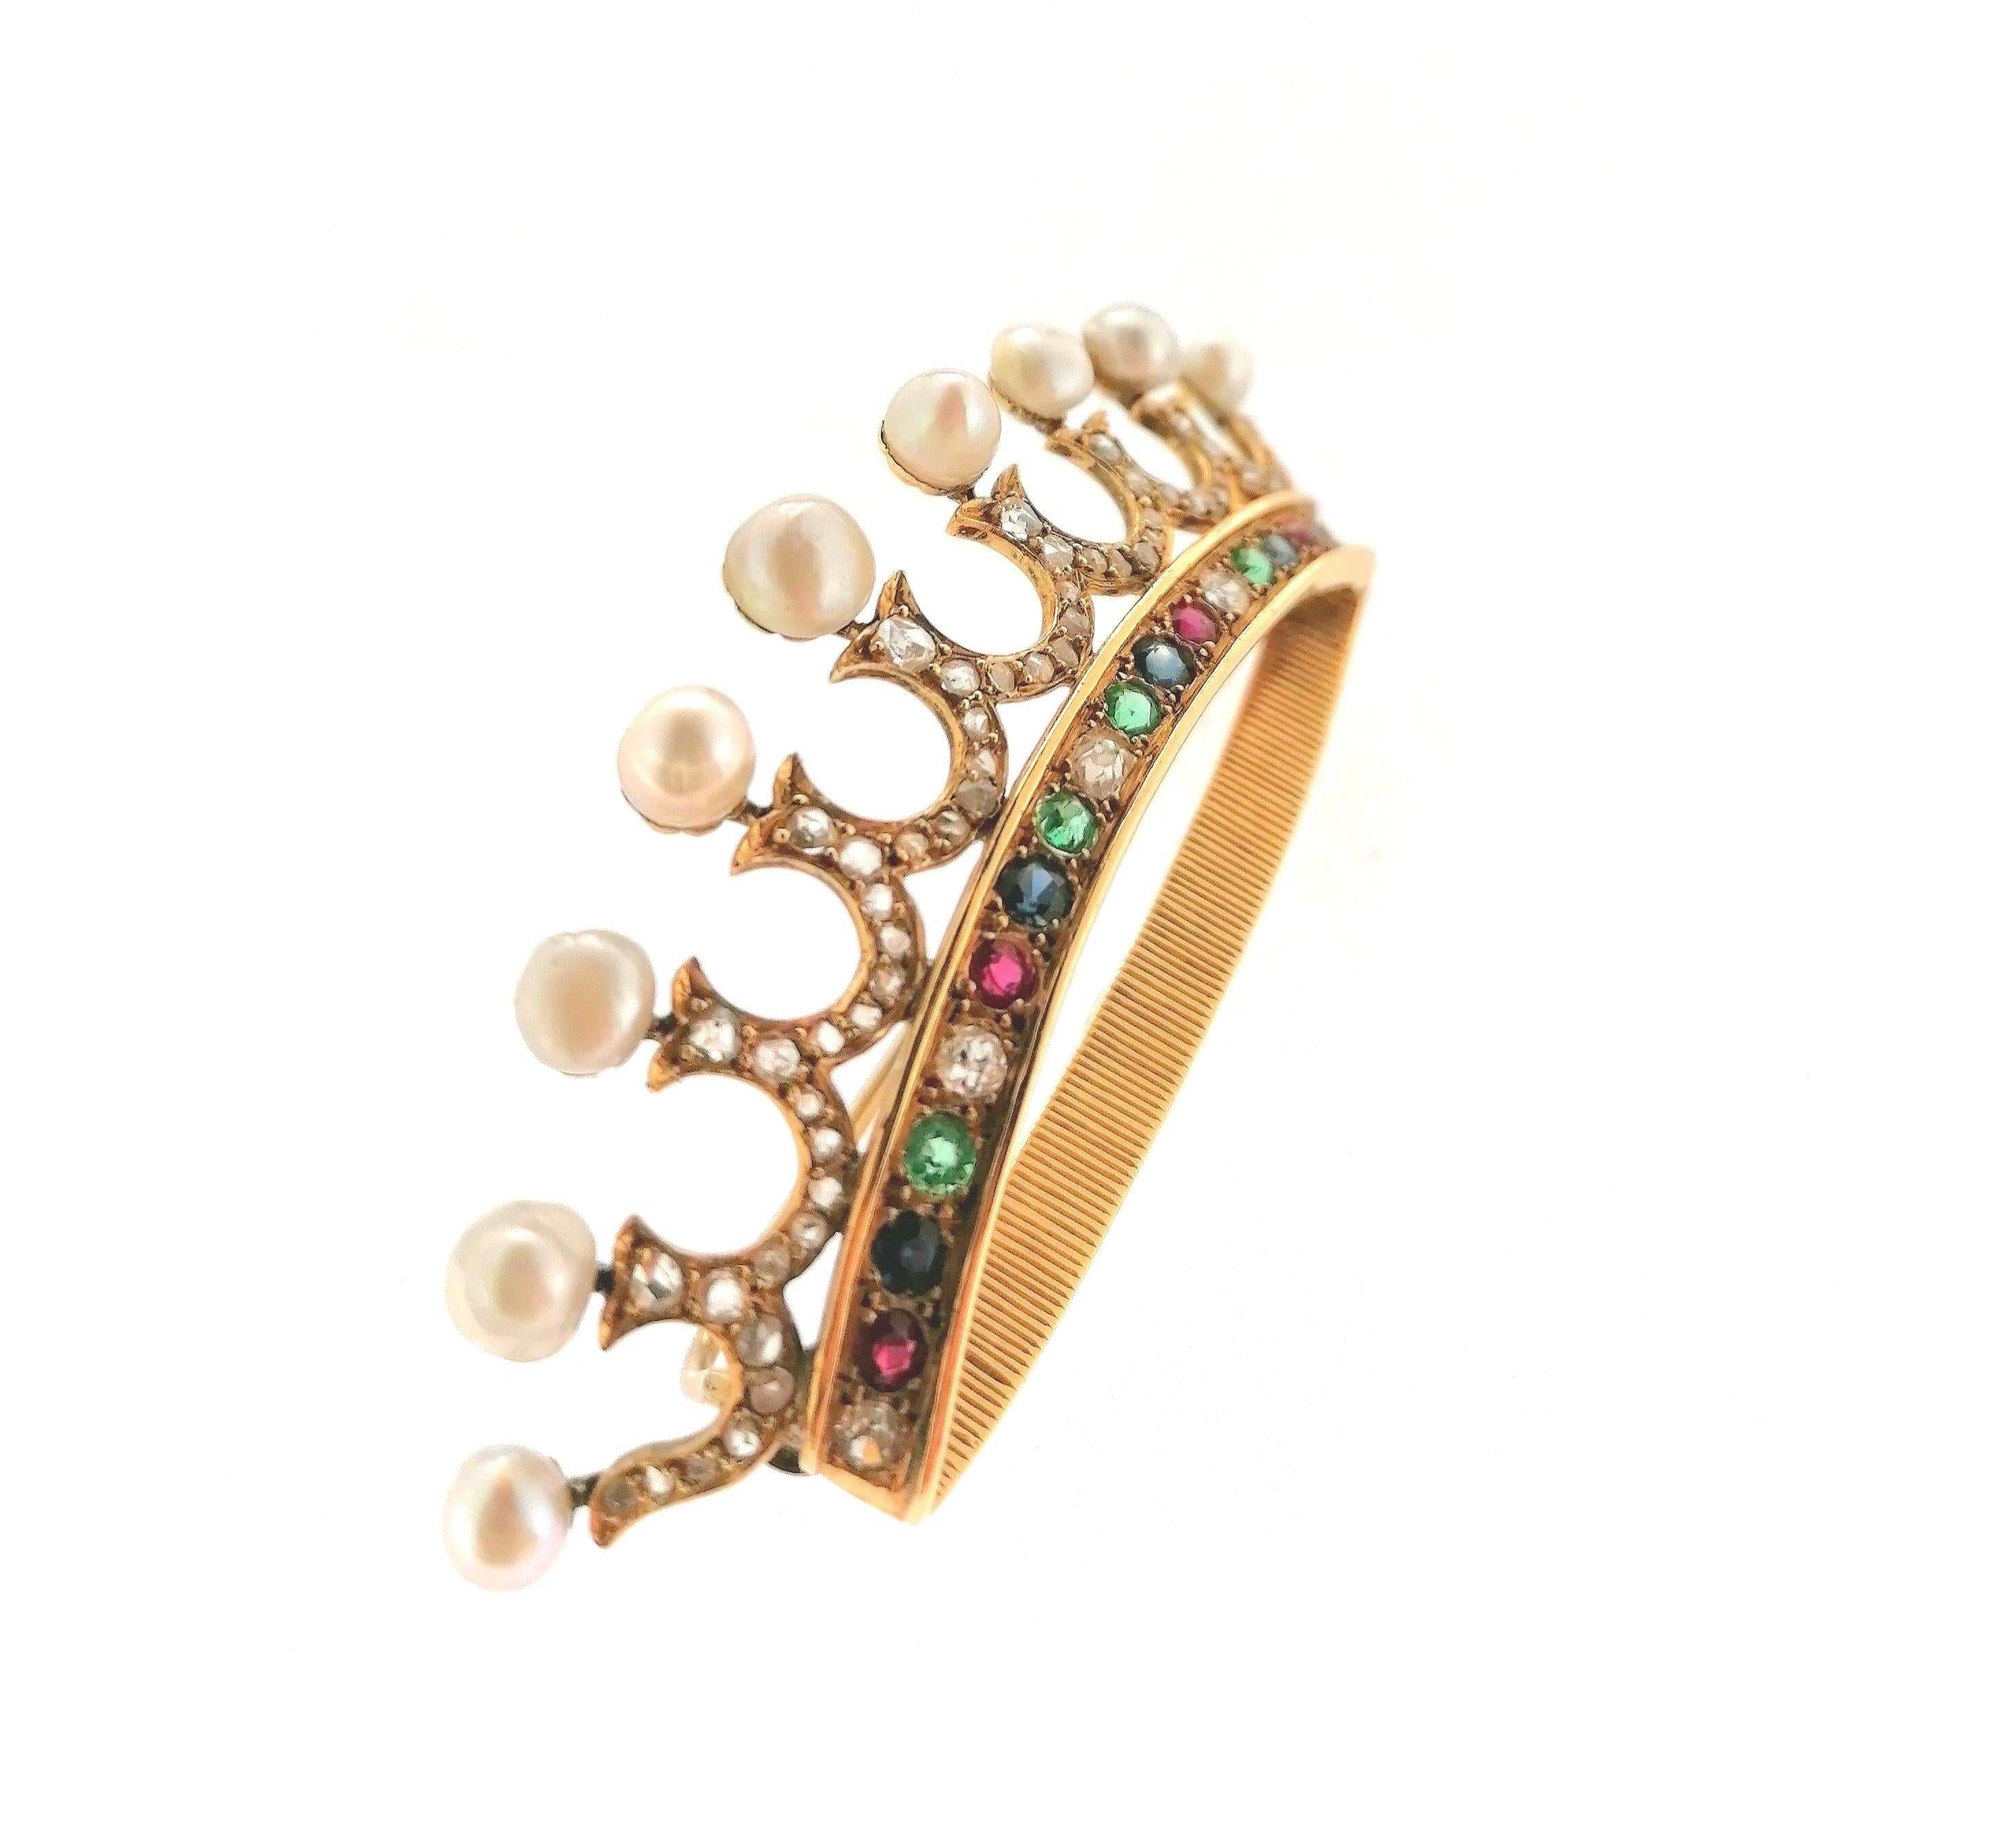 Magnificent 18 karats yellow gold crown brooch with two rubies, two emeralds, two saphires and sixty rose cut diamonds that have 0.55 carats estimated. Natural fine pearls give a special touch of class to this marquis crown. It has 9 with this